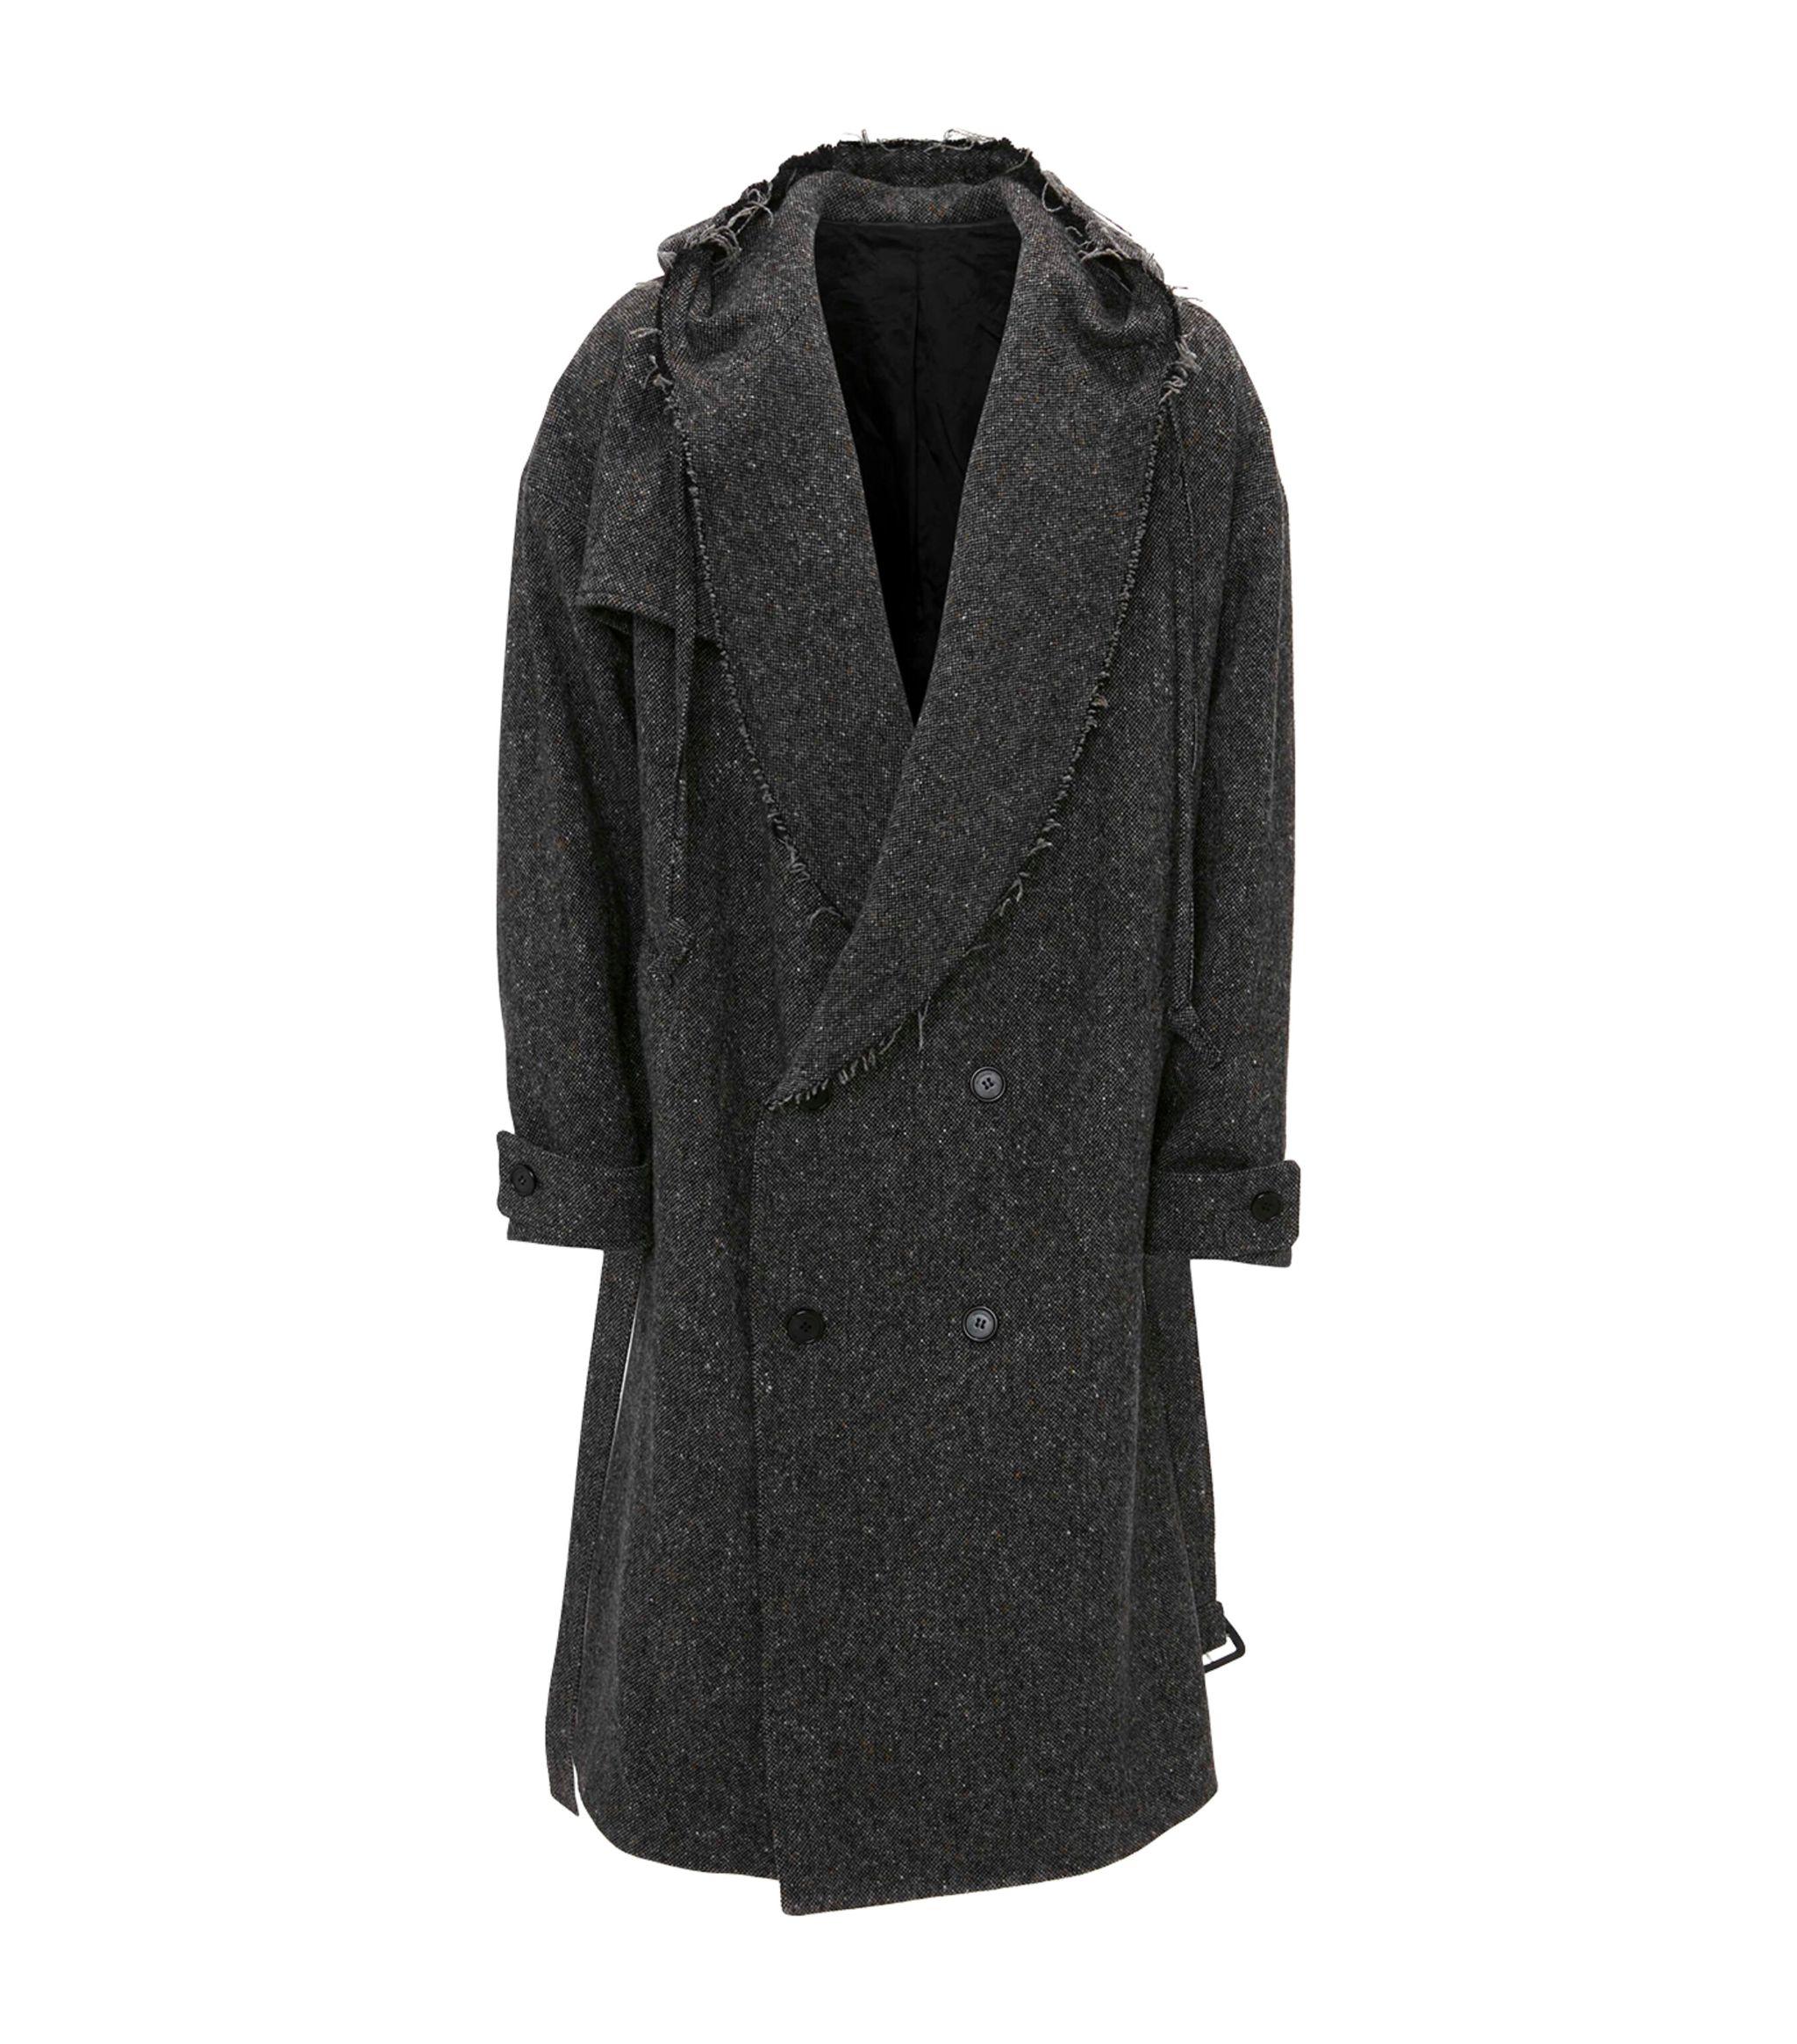 JW Anderson Wool Hooded Trench Coat in Black | Lyst